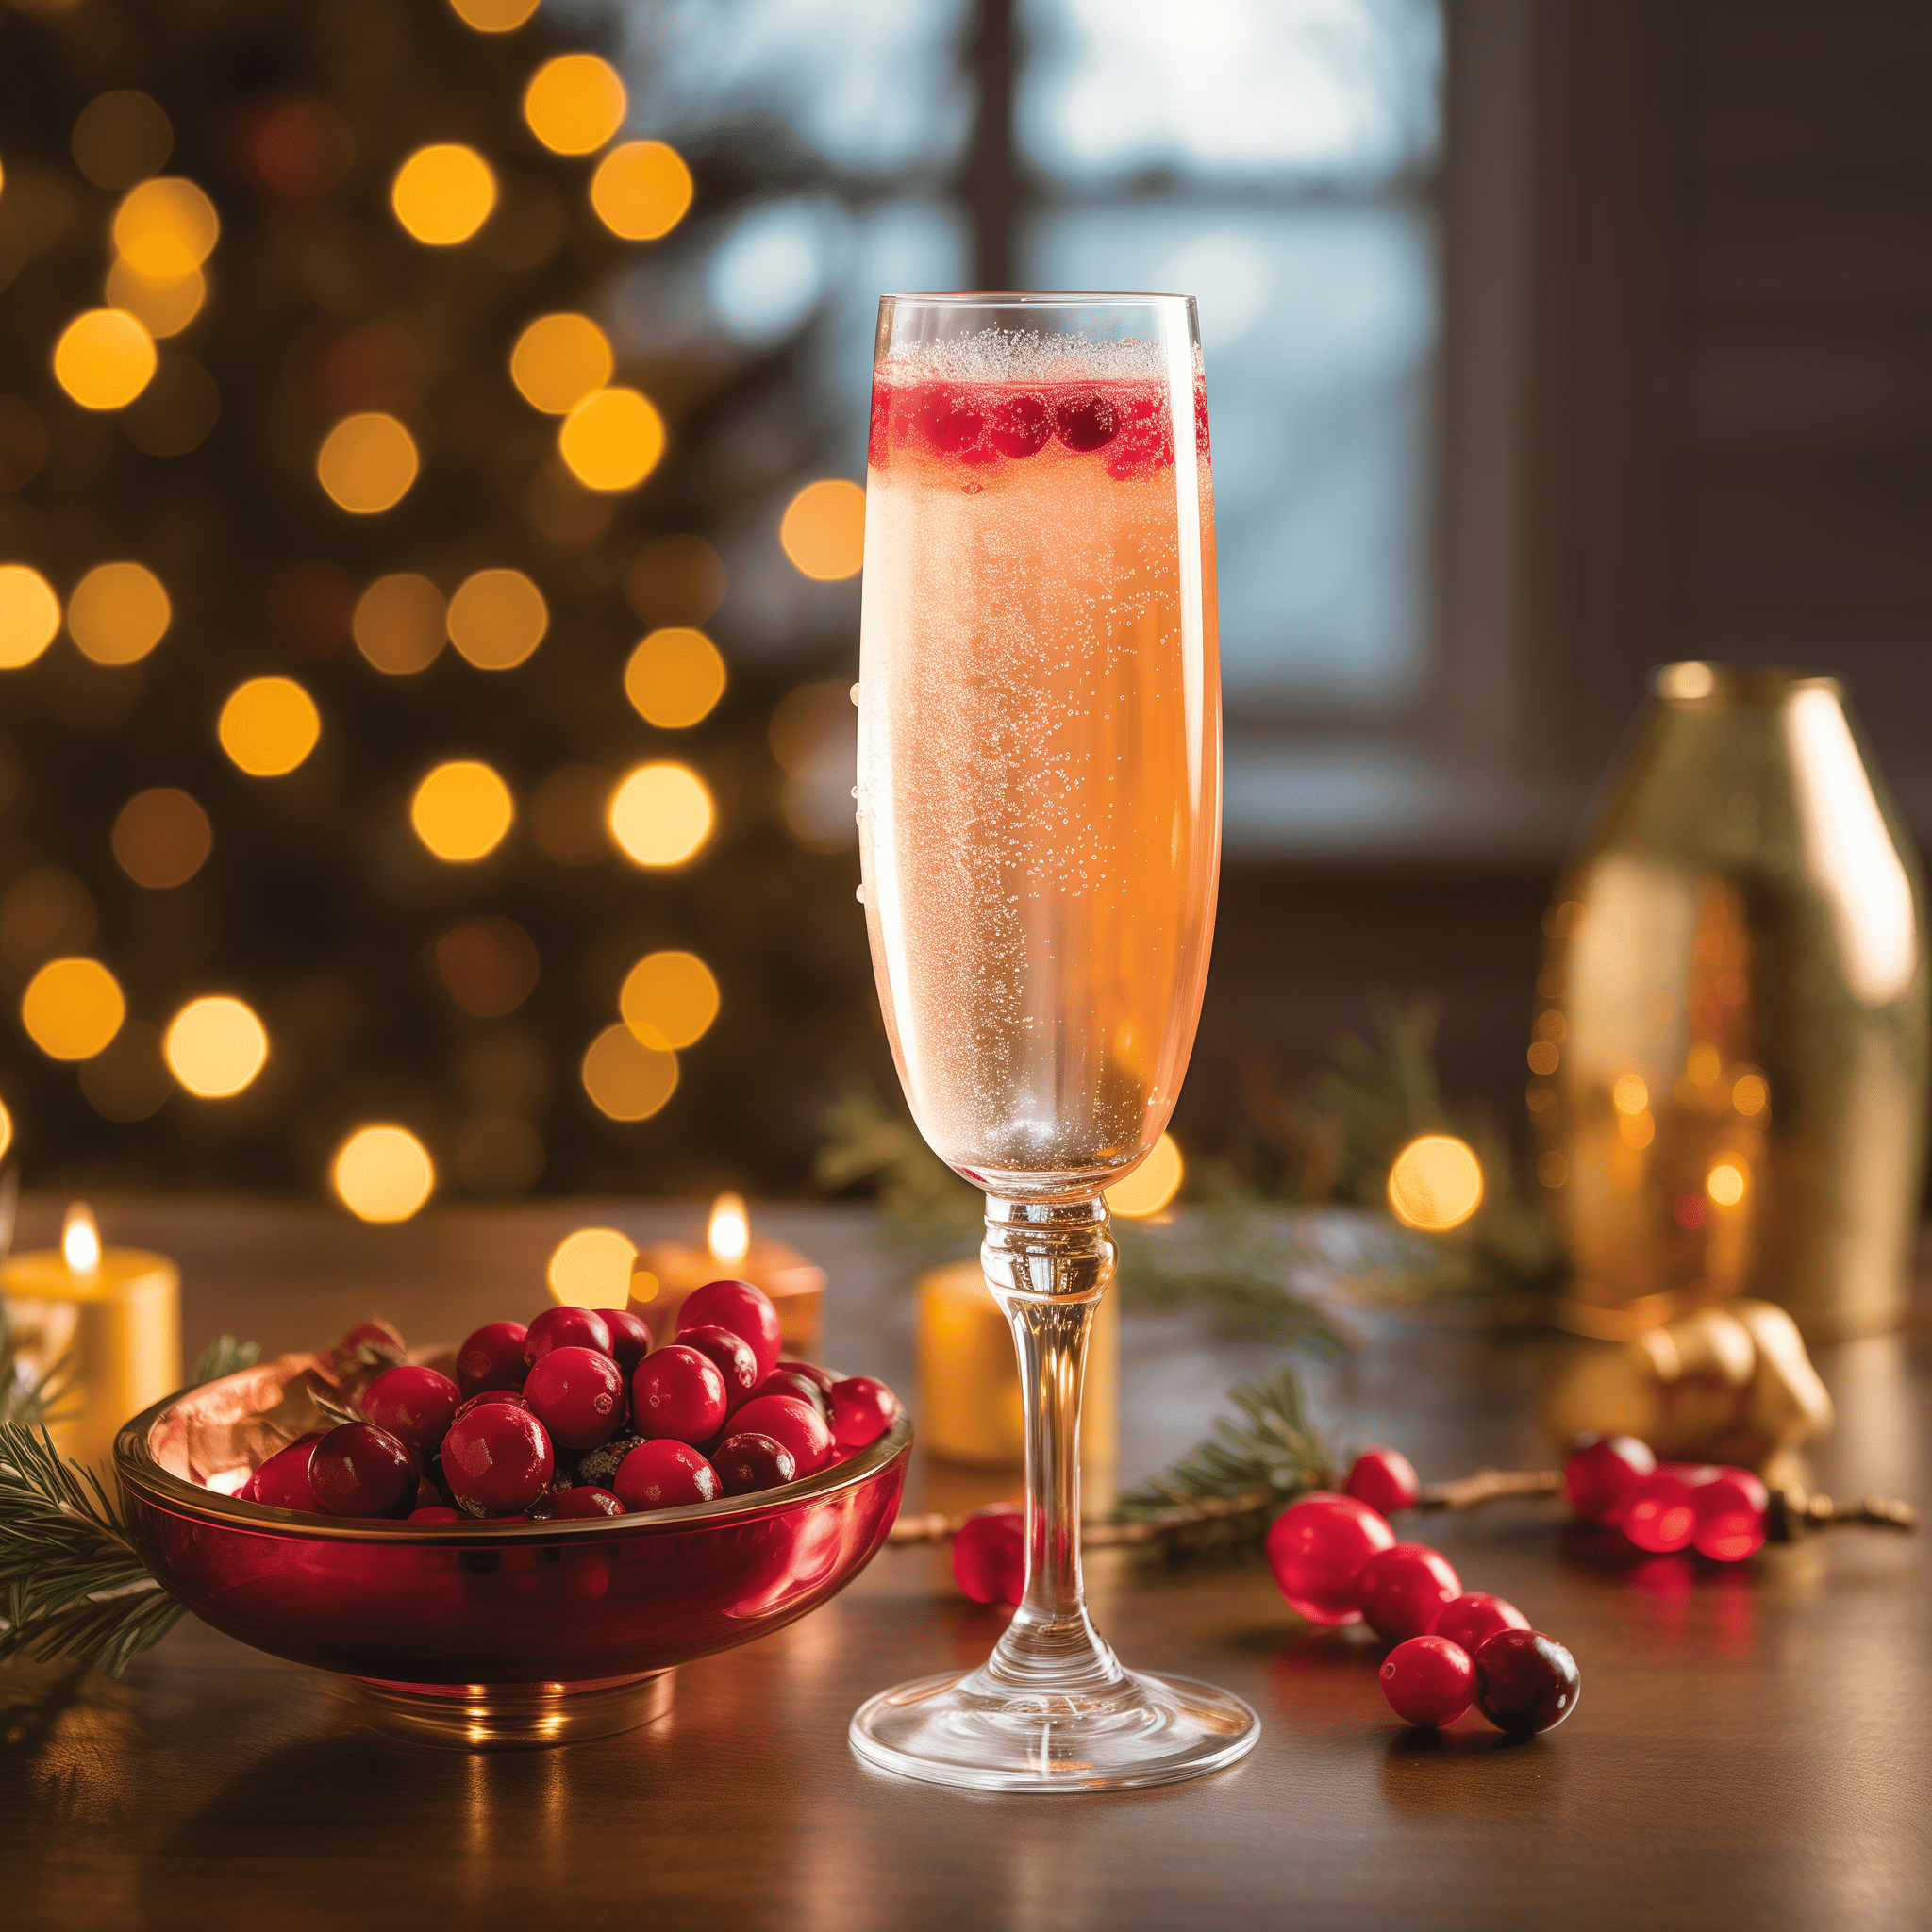 Cranberry Mimosa Cocktail Recipe - A Cranberry Mimosa is a delightful balance of sweet and tart. The effervescence of the sparkling wine adds a light and airy quality, while the cranberry juice provides a sharp contrast that is both refreshing and slightly tangy.